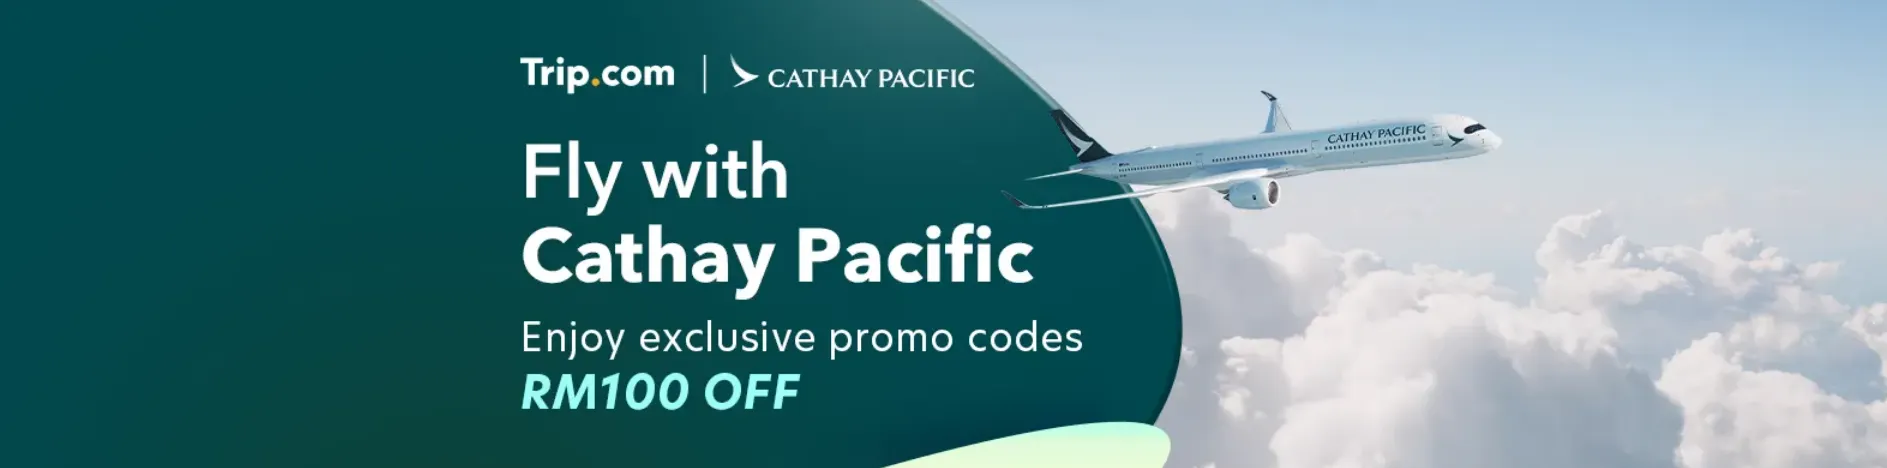 Trip.com Promo Code Malaysia: Fly with Cathay Pacific: Enjoy RM100 OFF